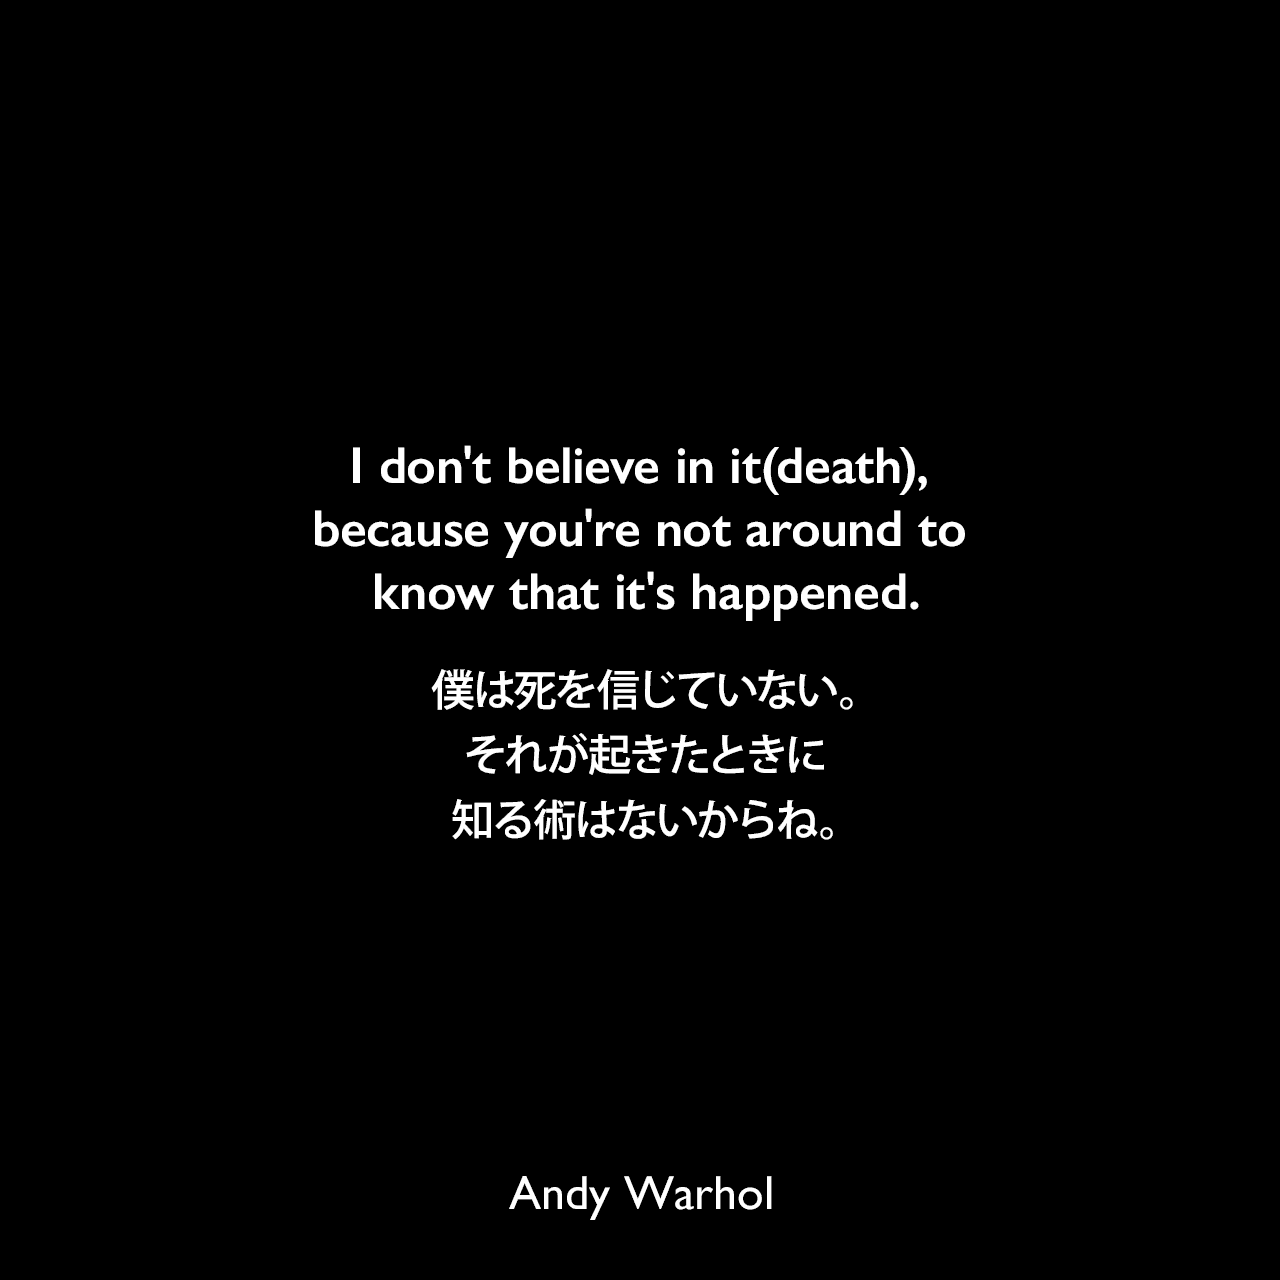 I don't believe in it(death), because you're not around to know that it's happened.僕は死を信じていない。それが起きたときに知る術はないからね。- アンディ・ウォーホルによる本「ぼくの哲学（The Philosophy of Andy Warhol）より」Andy Warhol